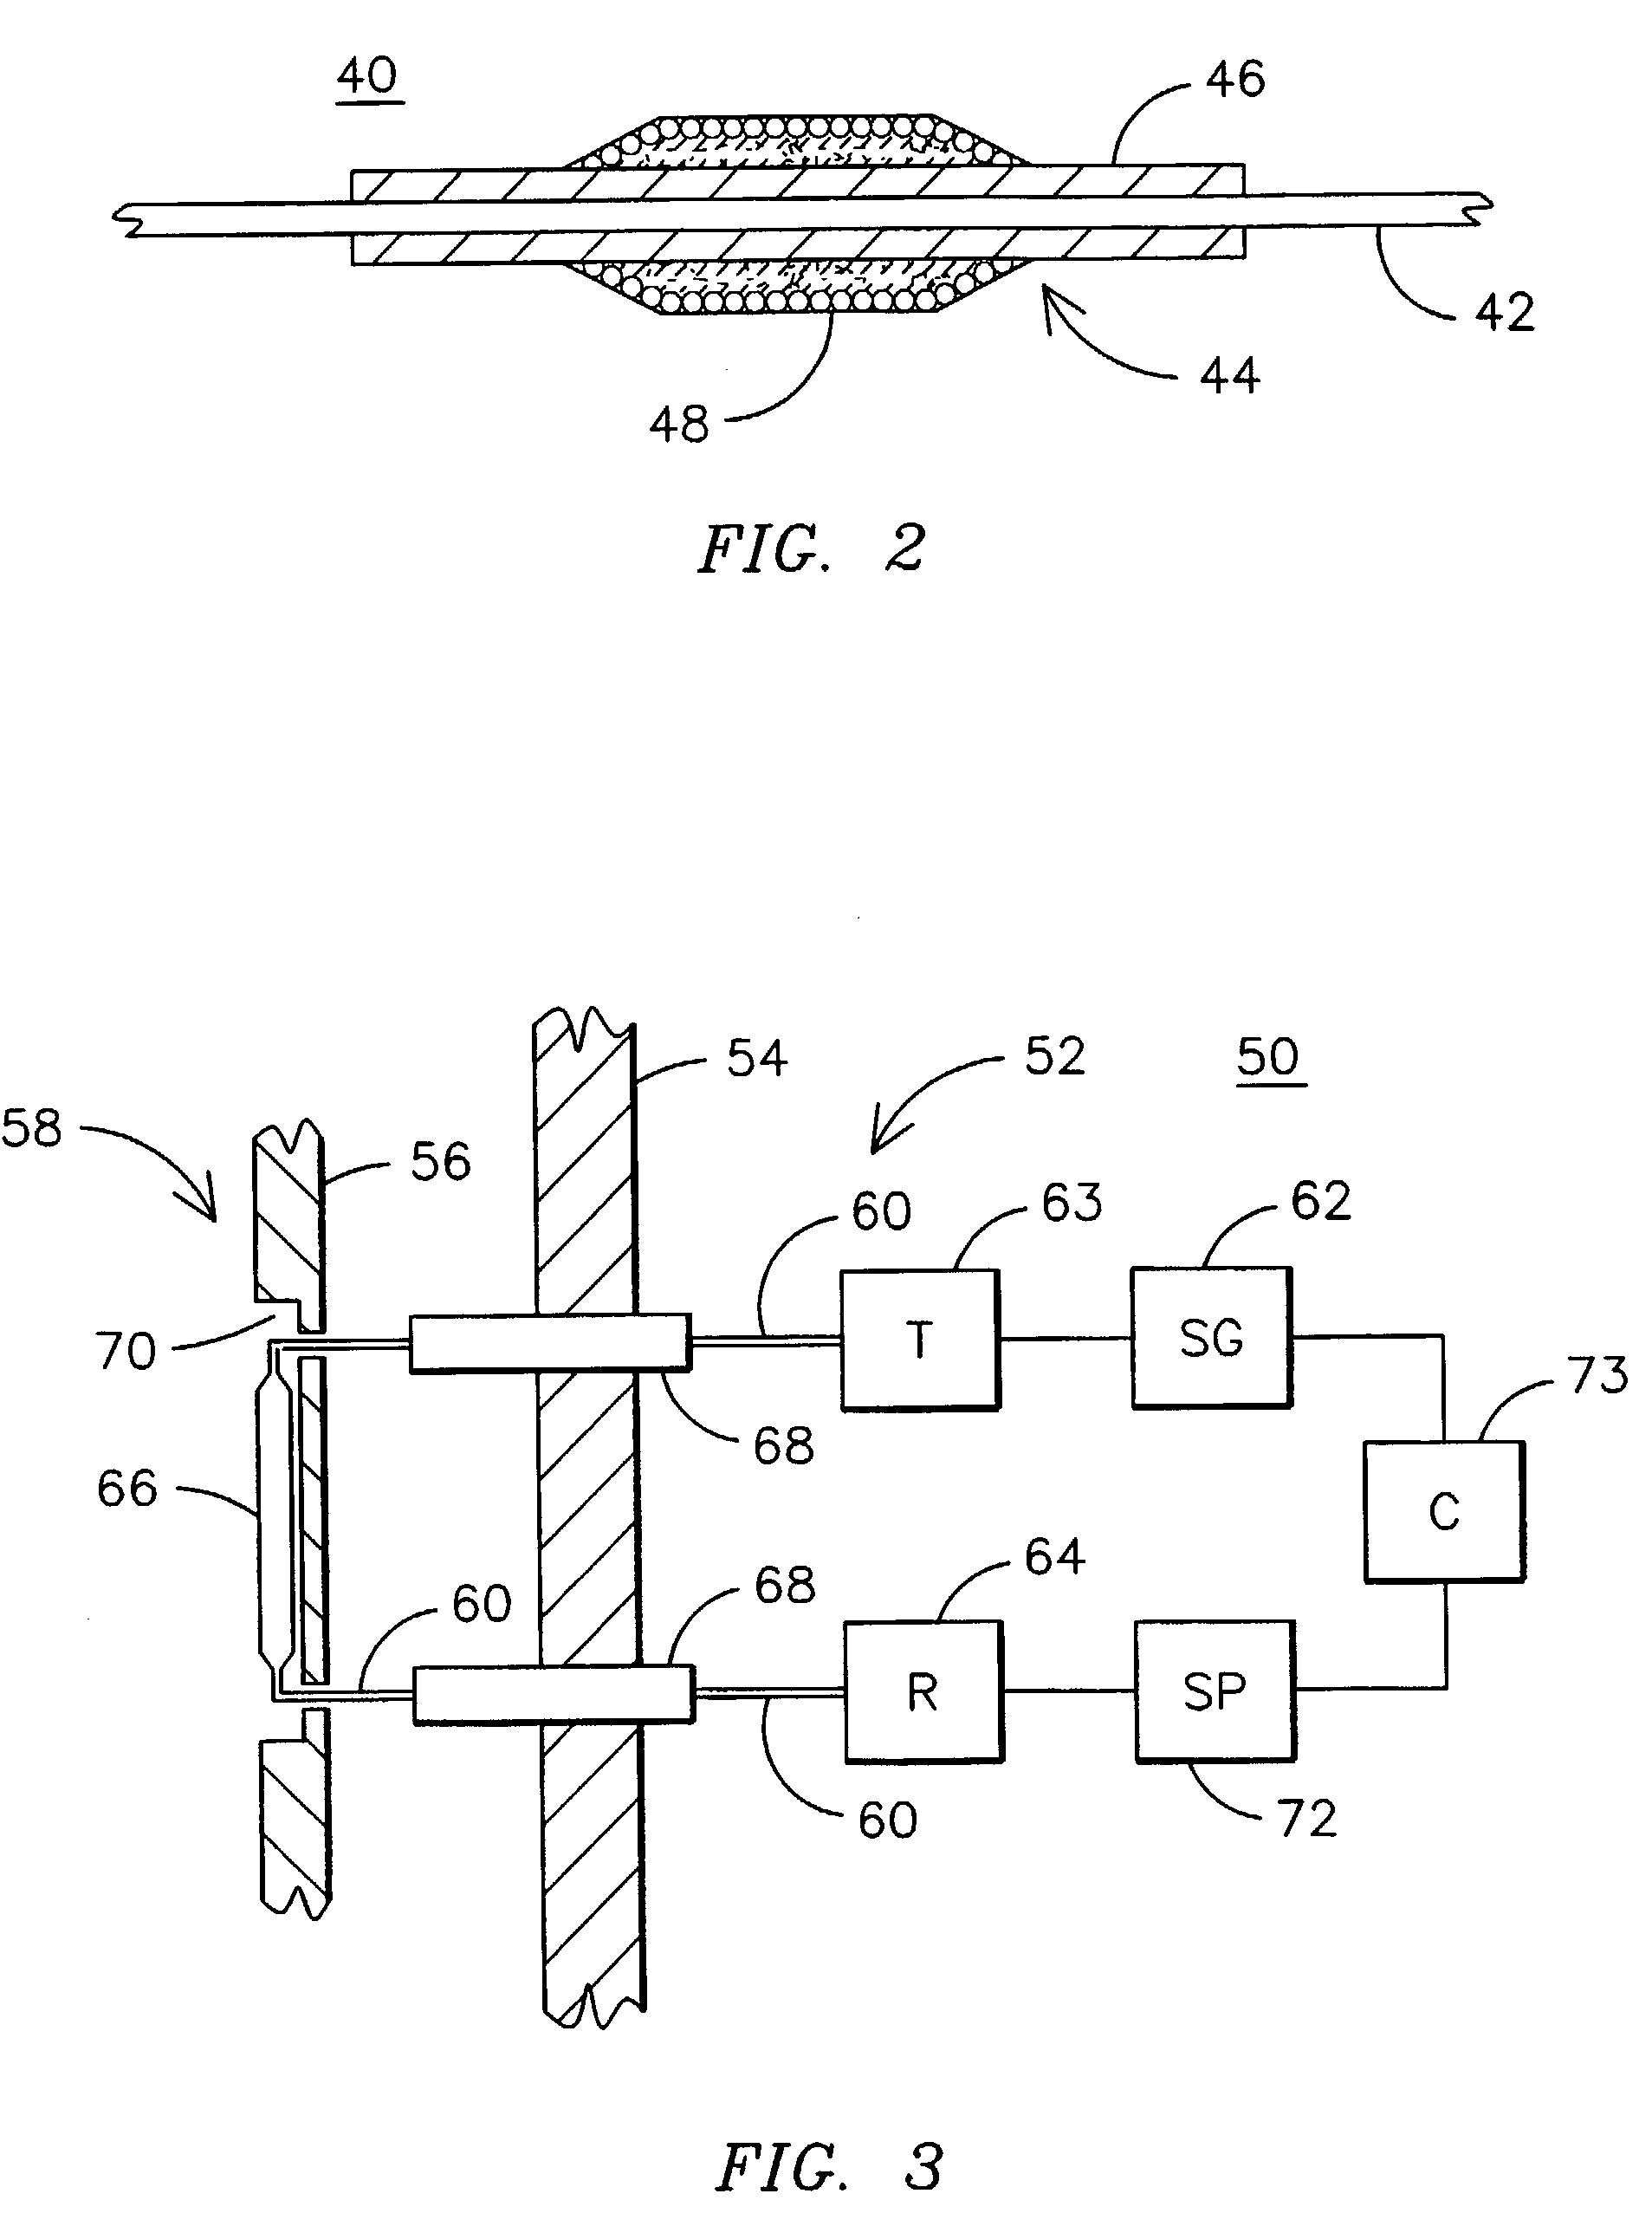 Apparatus for sensing pressure fluctuations in a hostile environment